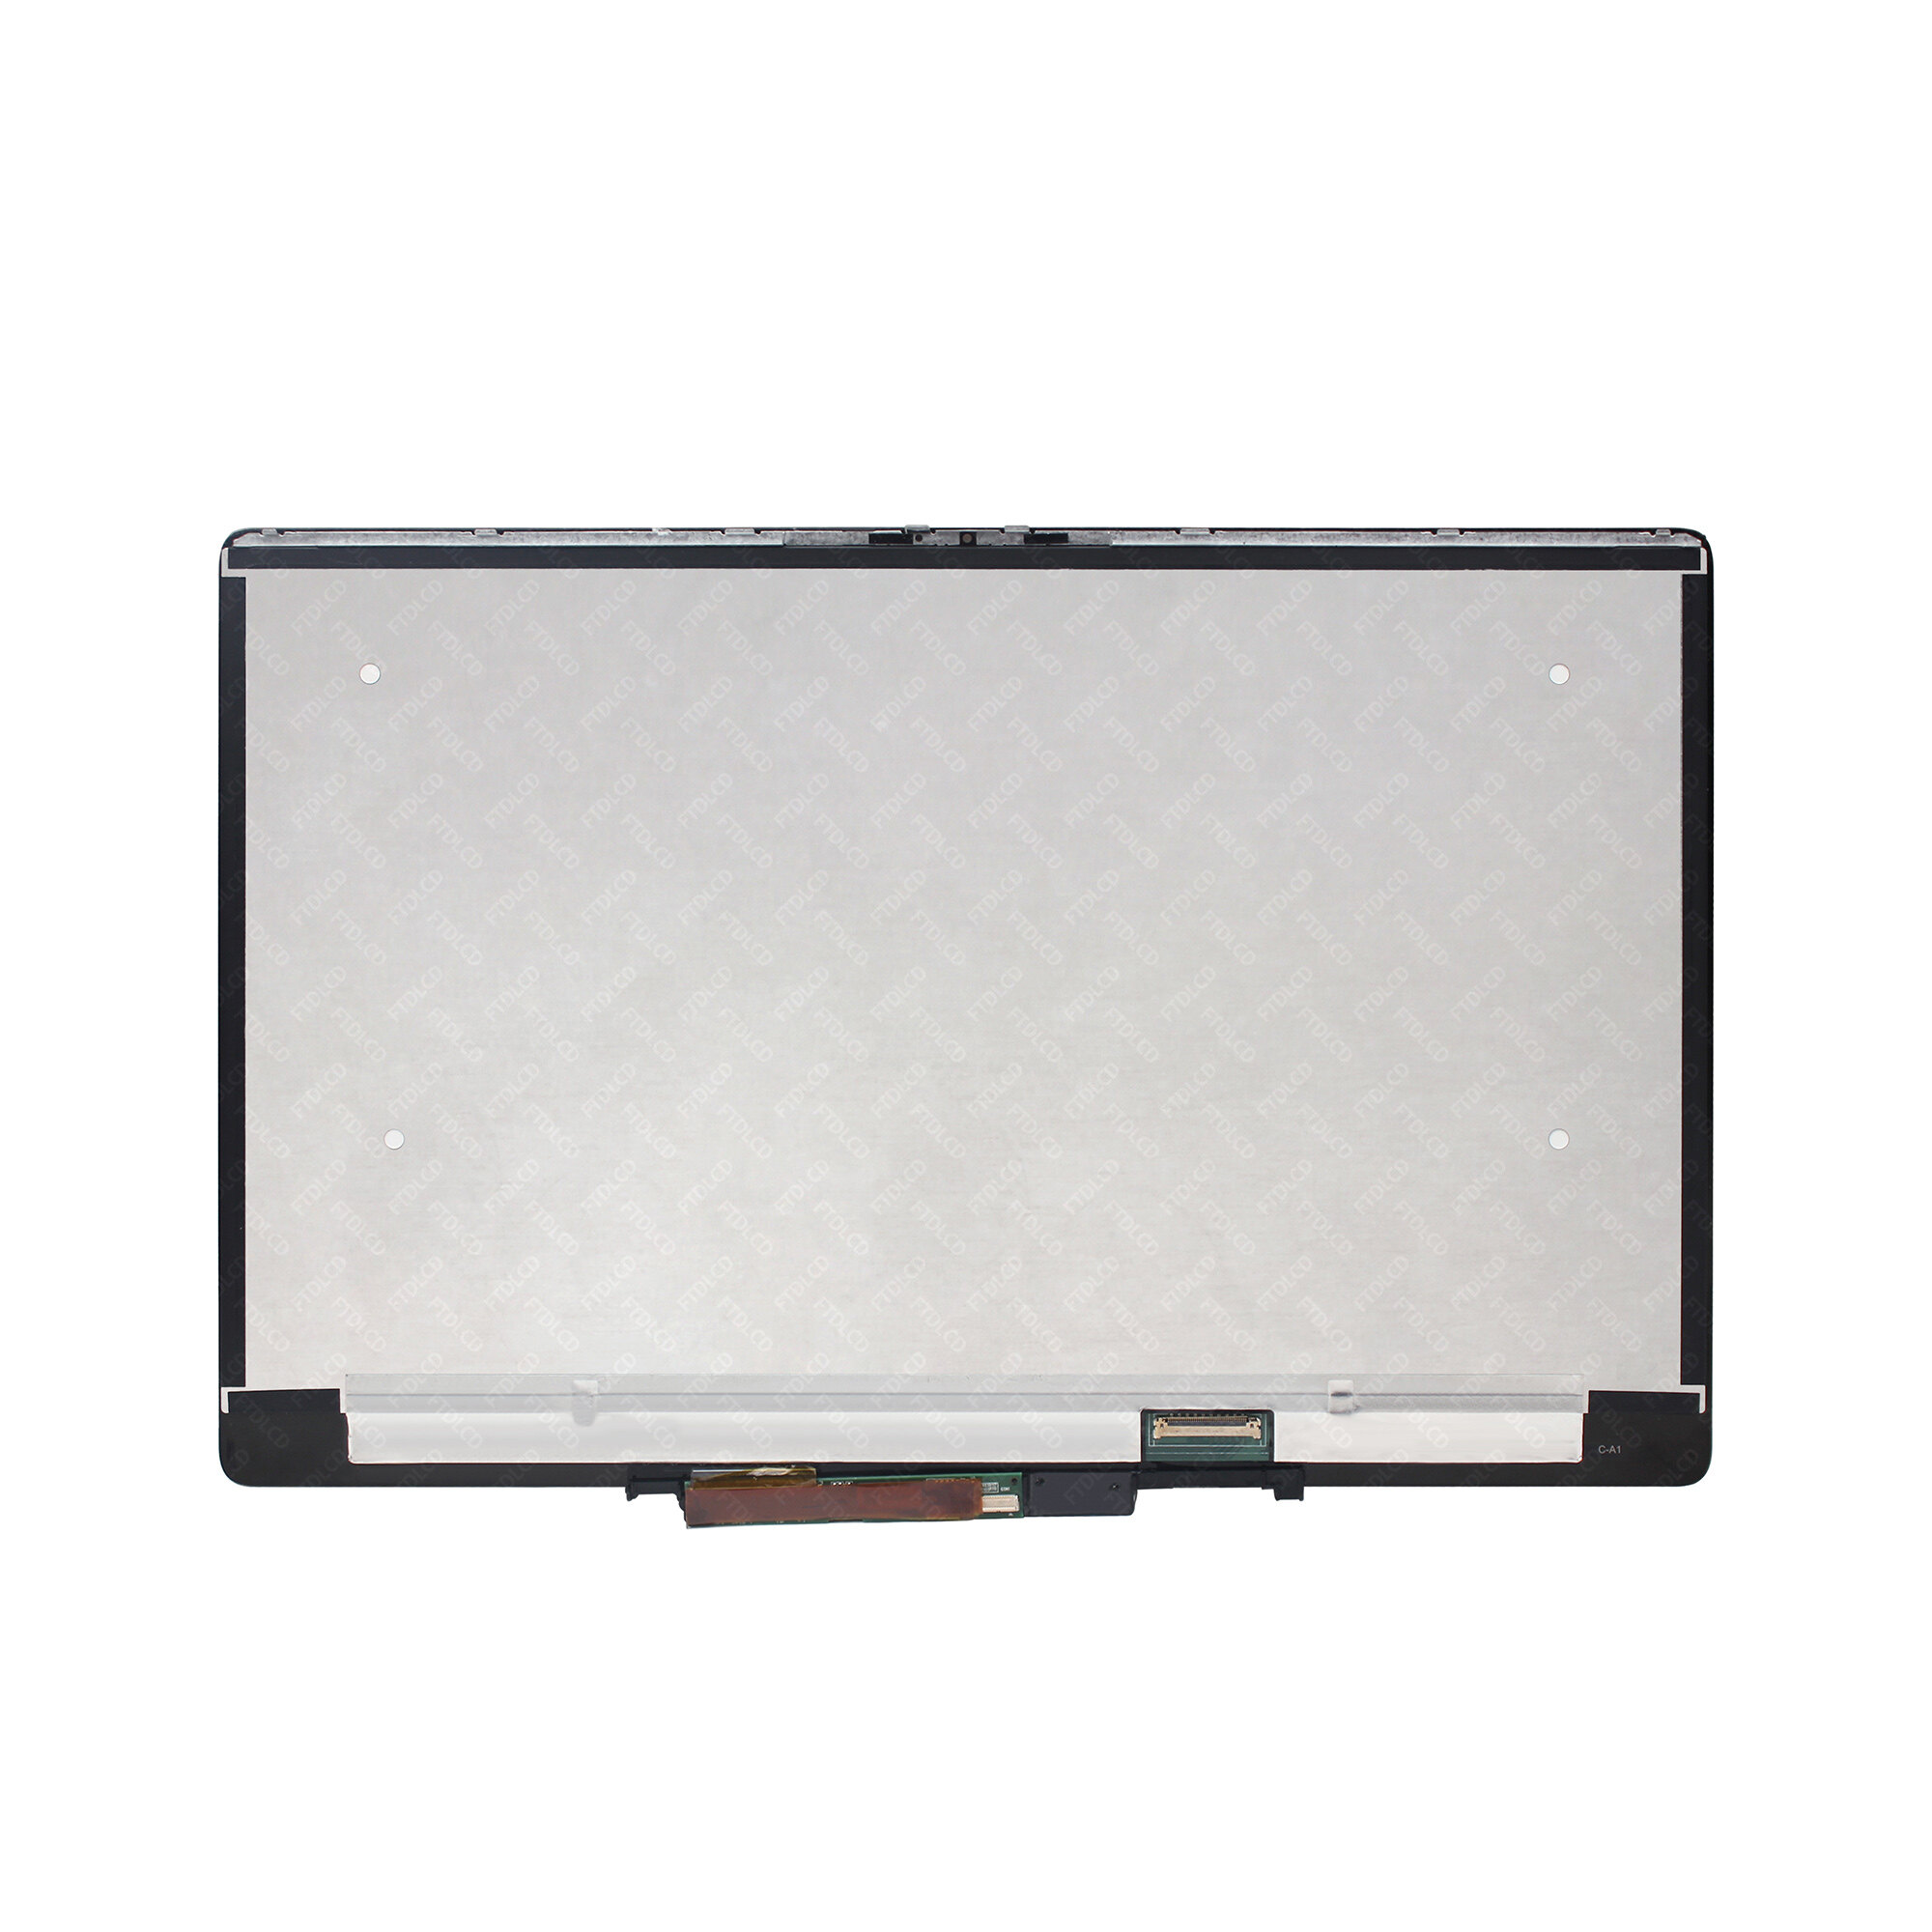 Kreplacement LCD Display Touch Screen Digitizer Assembly for Dell Inspiron 13 7386 P91G001